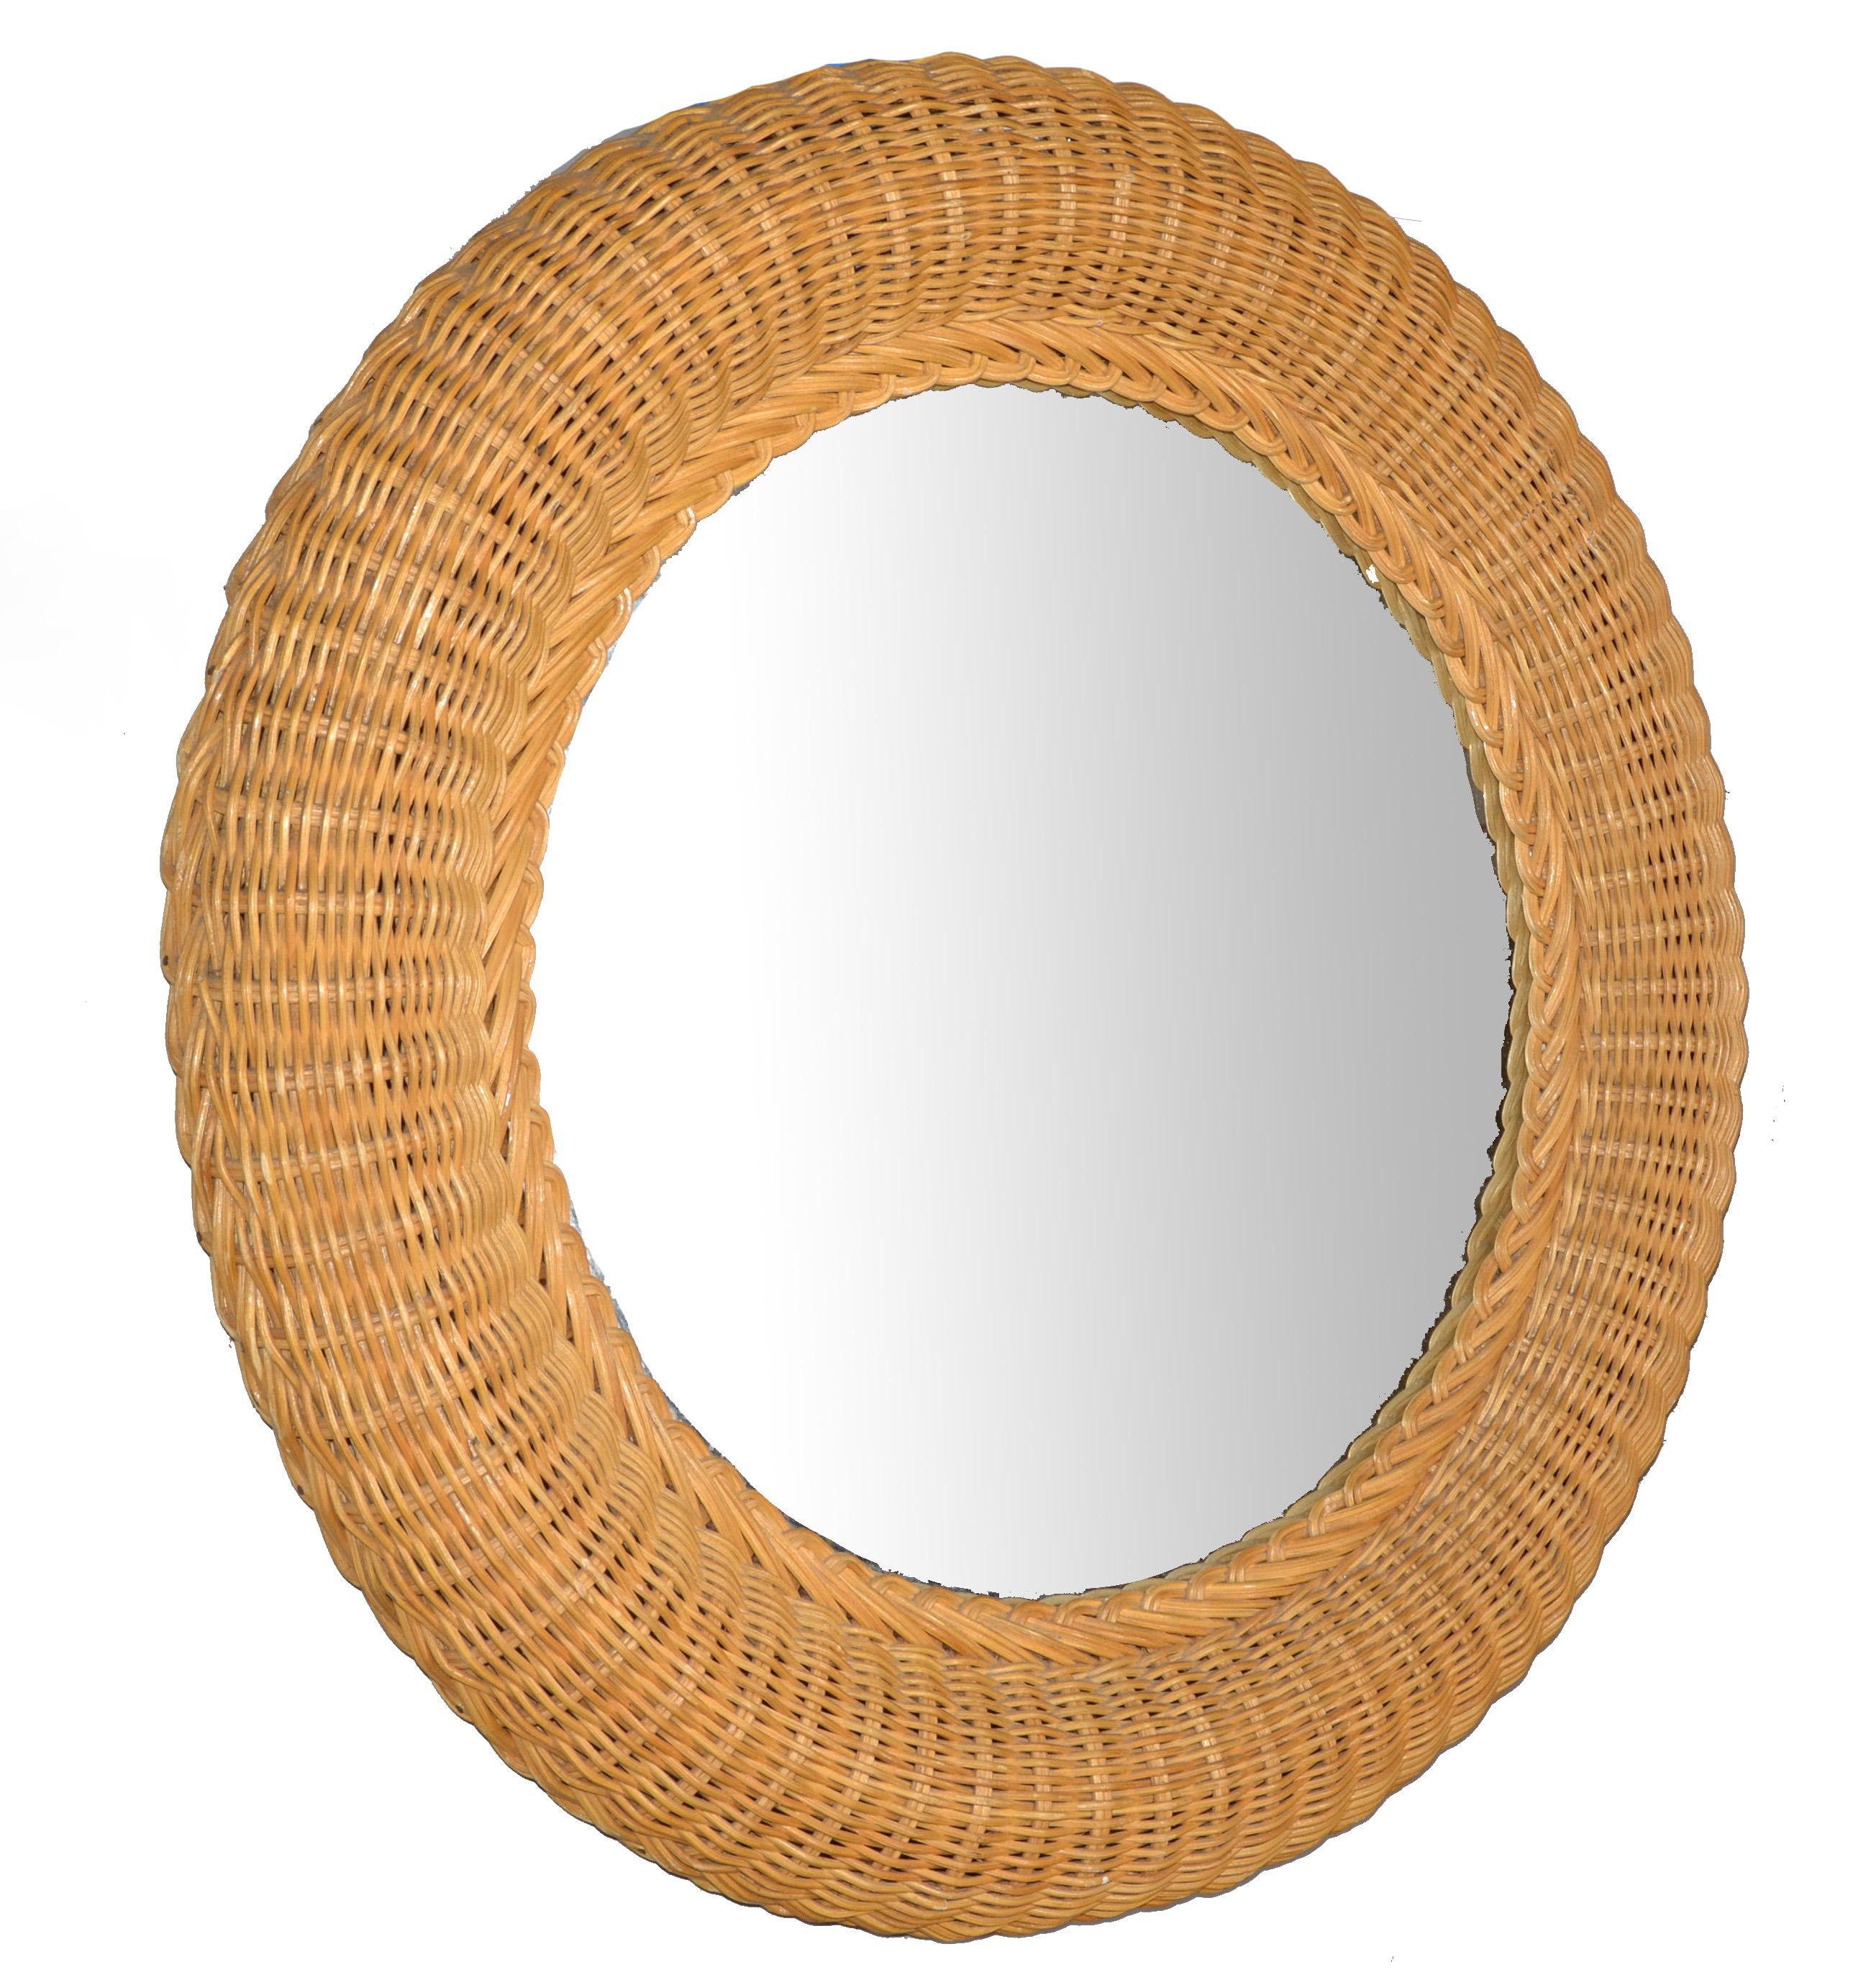 Round French Coastal Handwoven Pencil Reed & Wicker Wall Mirror Bohemian Chic In Good Condition For Sale In Miami, FL